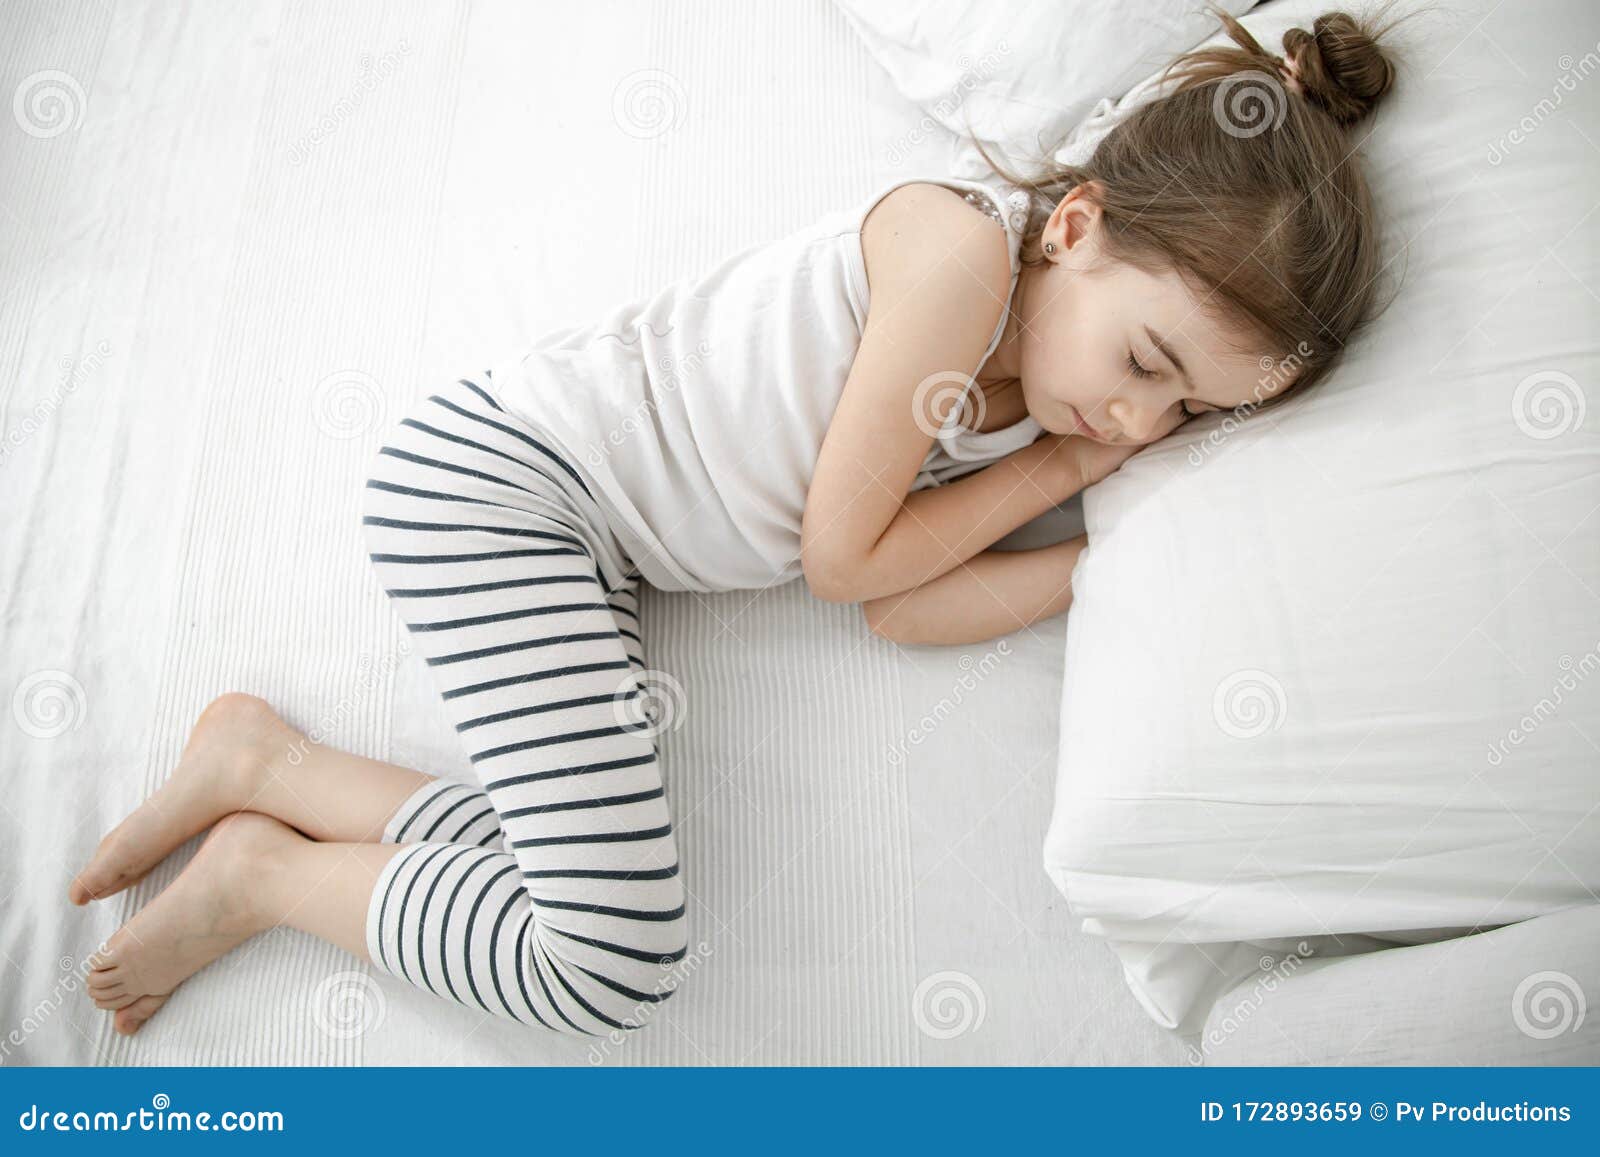 A Cute Little Girl is Sleeping in a White Bed Stock Image - Image of ...